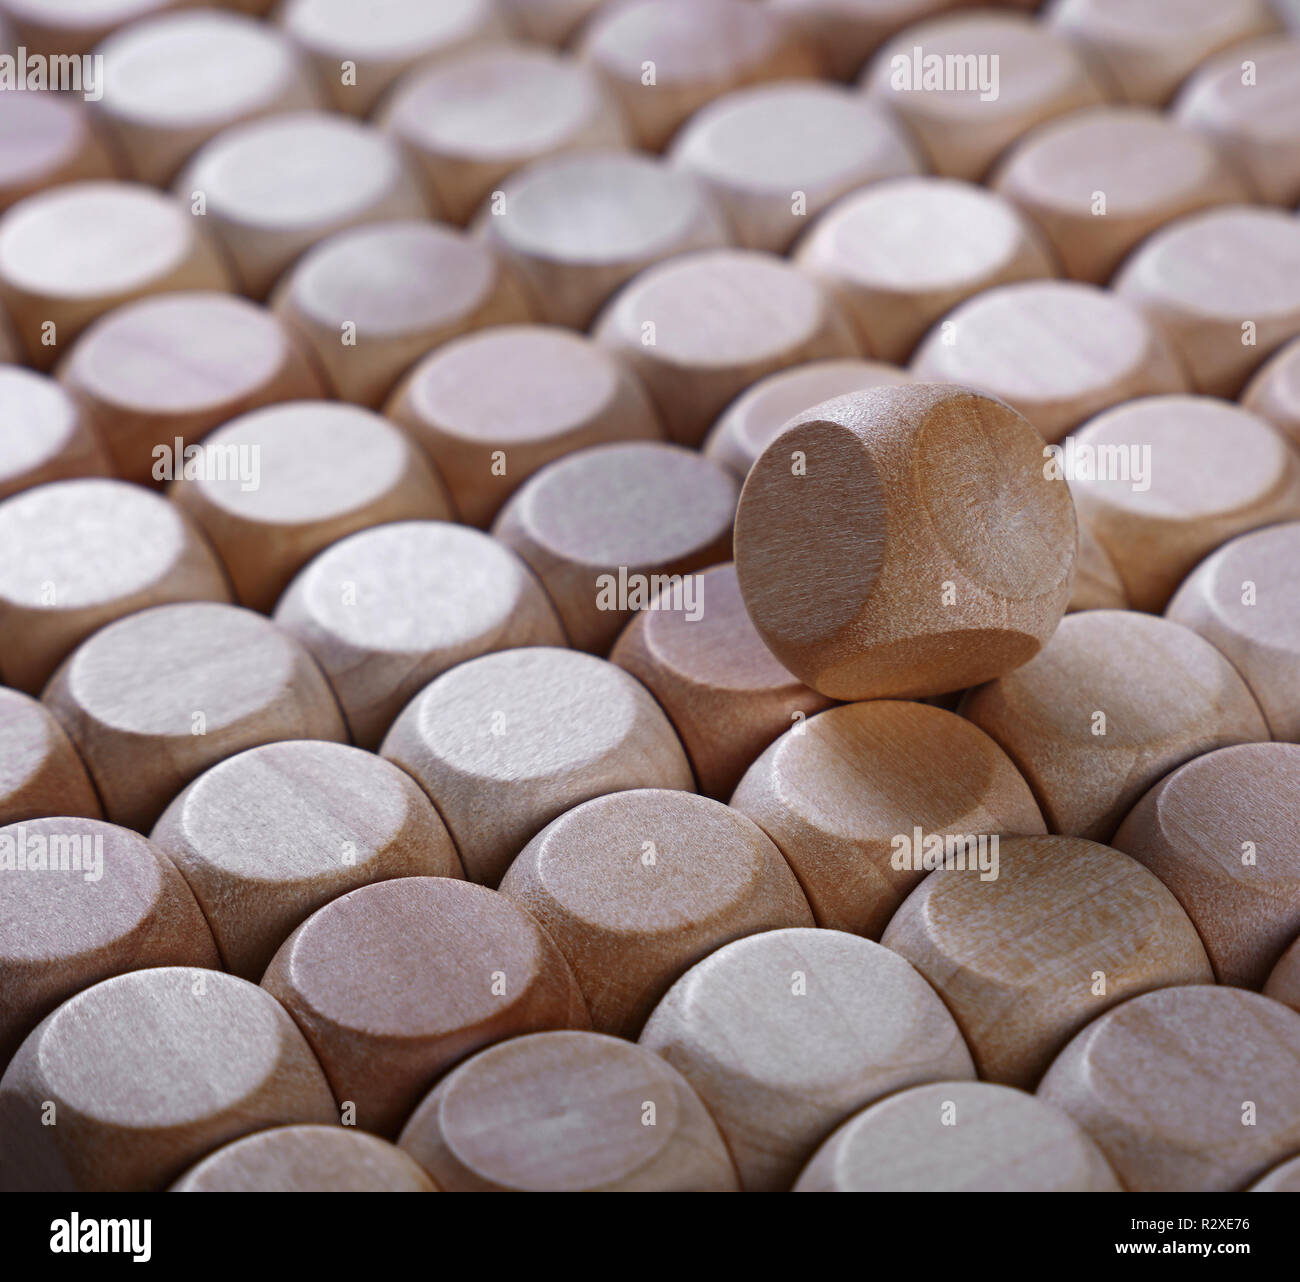 Close up background pattern of natural wooden dice shaped toy building blocks, high angle view perspective Stock Photo